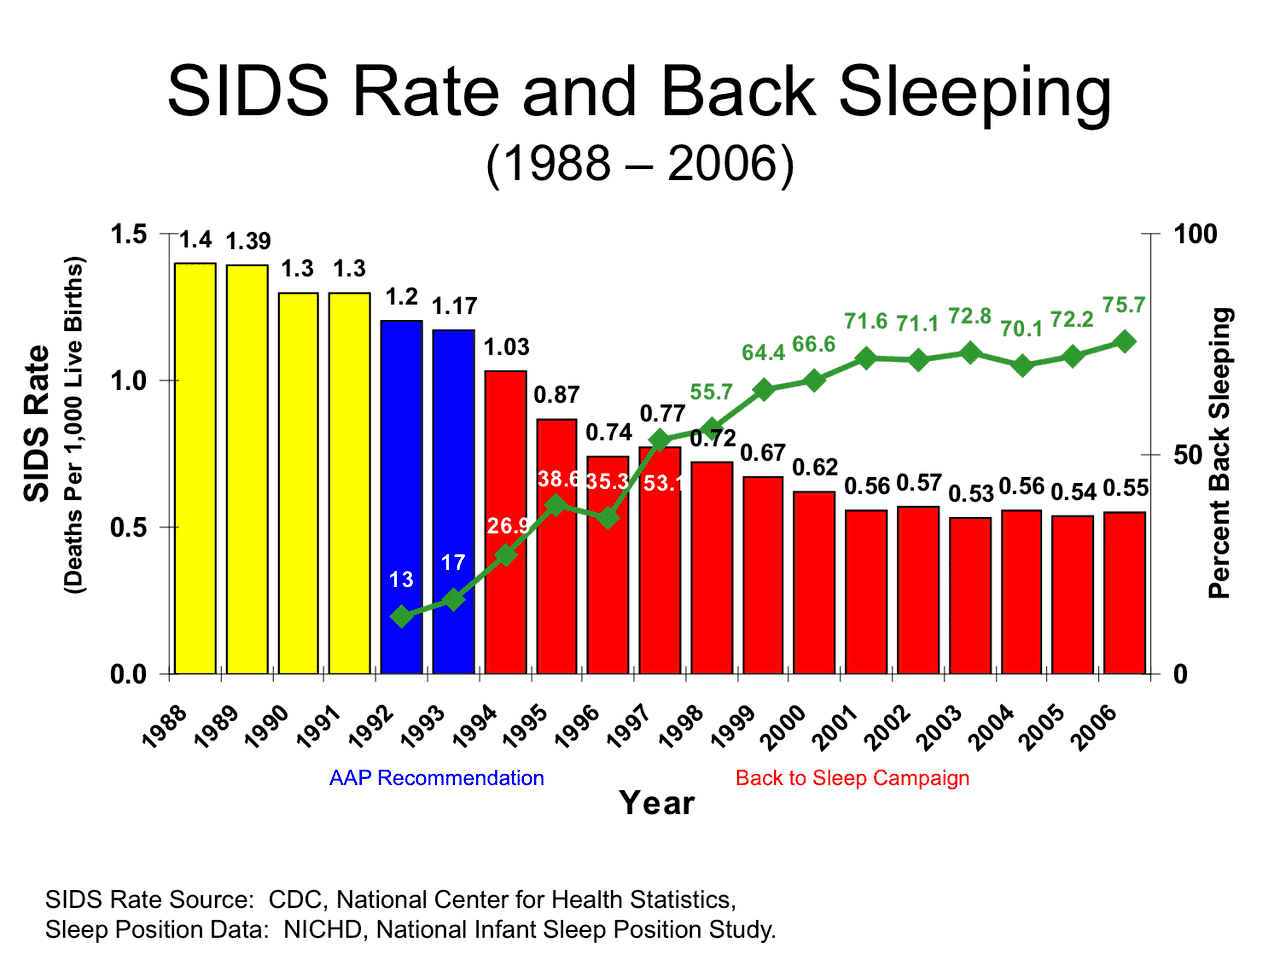 Incidence of SIDs in newborns following back to sleep campaign